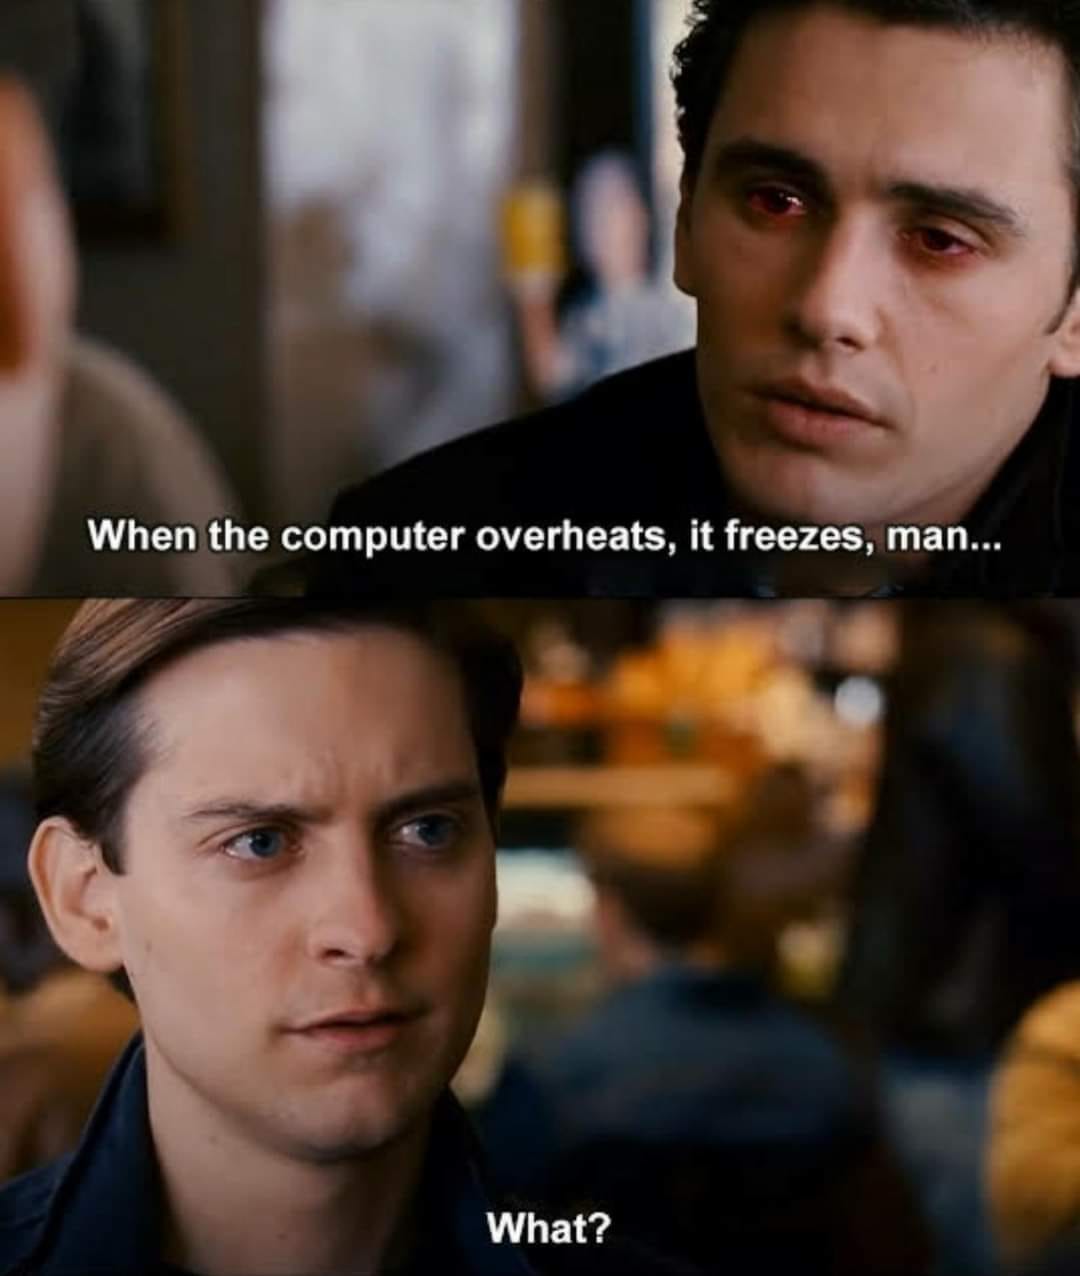 May be an image of 2 people and text that says 'When the computer overheats, it freezes, man... What?'